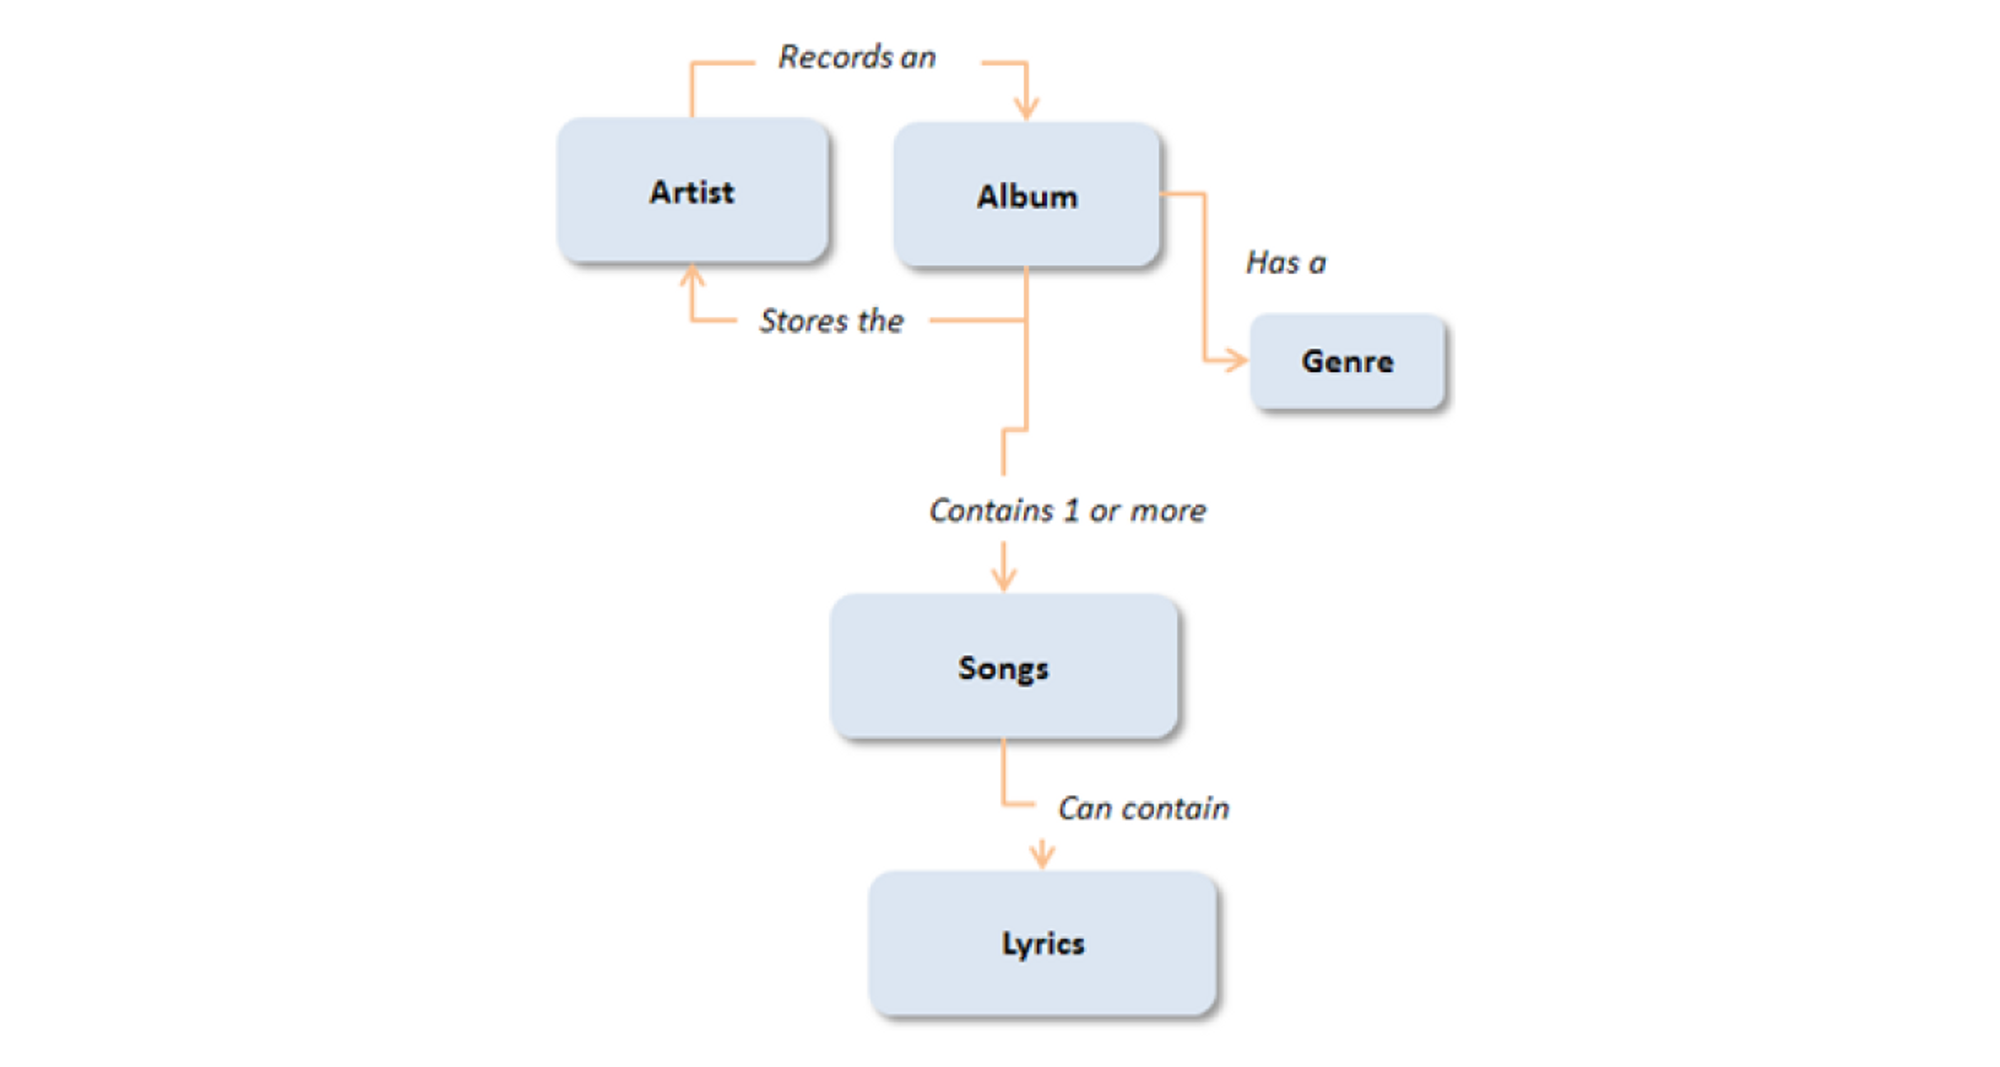 Blocks representing objects such as Artist, Album, and Genre. Lines connect the blocks, representing relationships, with labels such as Records On or Has A.